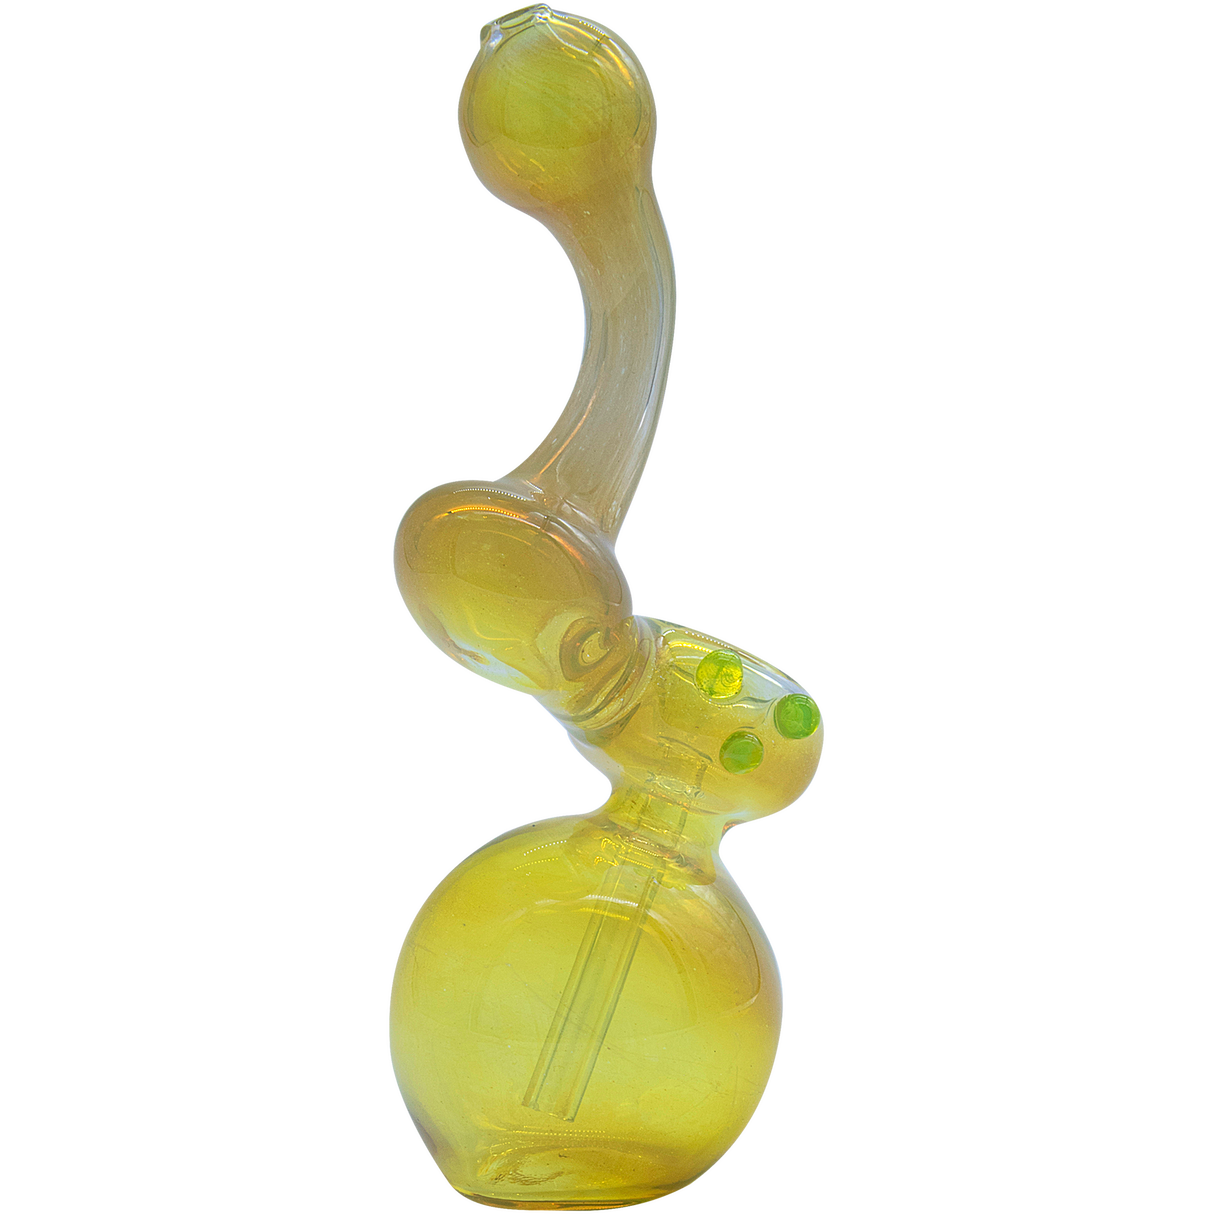 LA Pipes "Silver Sherlock" Fumed Bubbler Pipe in Yellow, 6" Borosilicate Glass for Dry Herbs, Front View